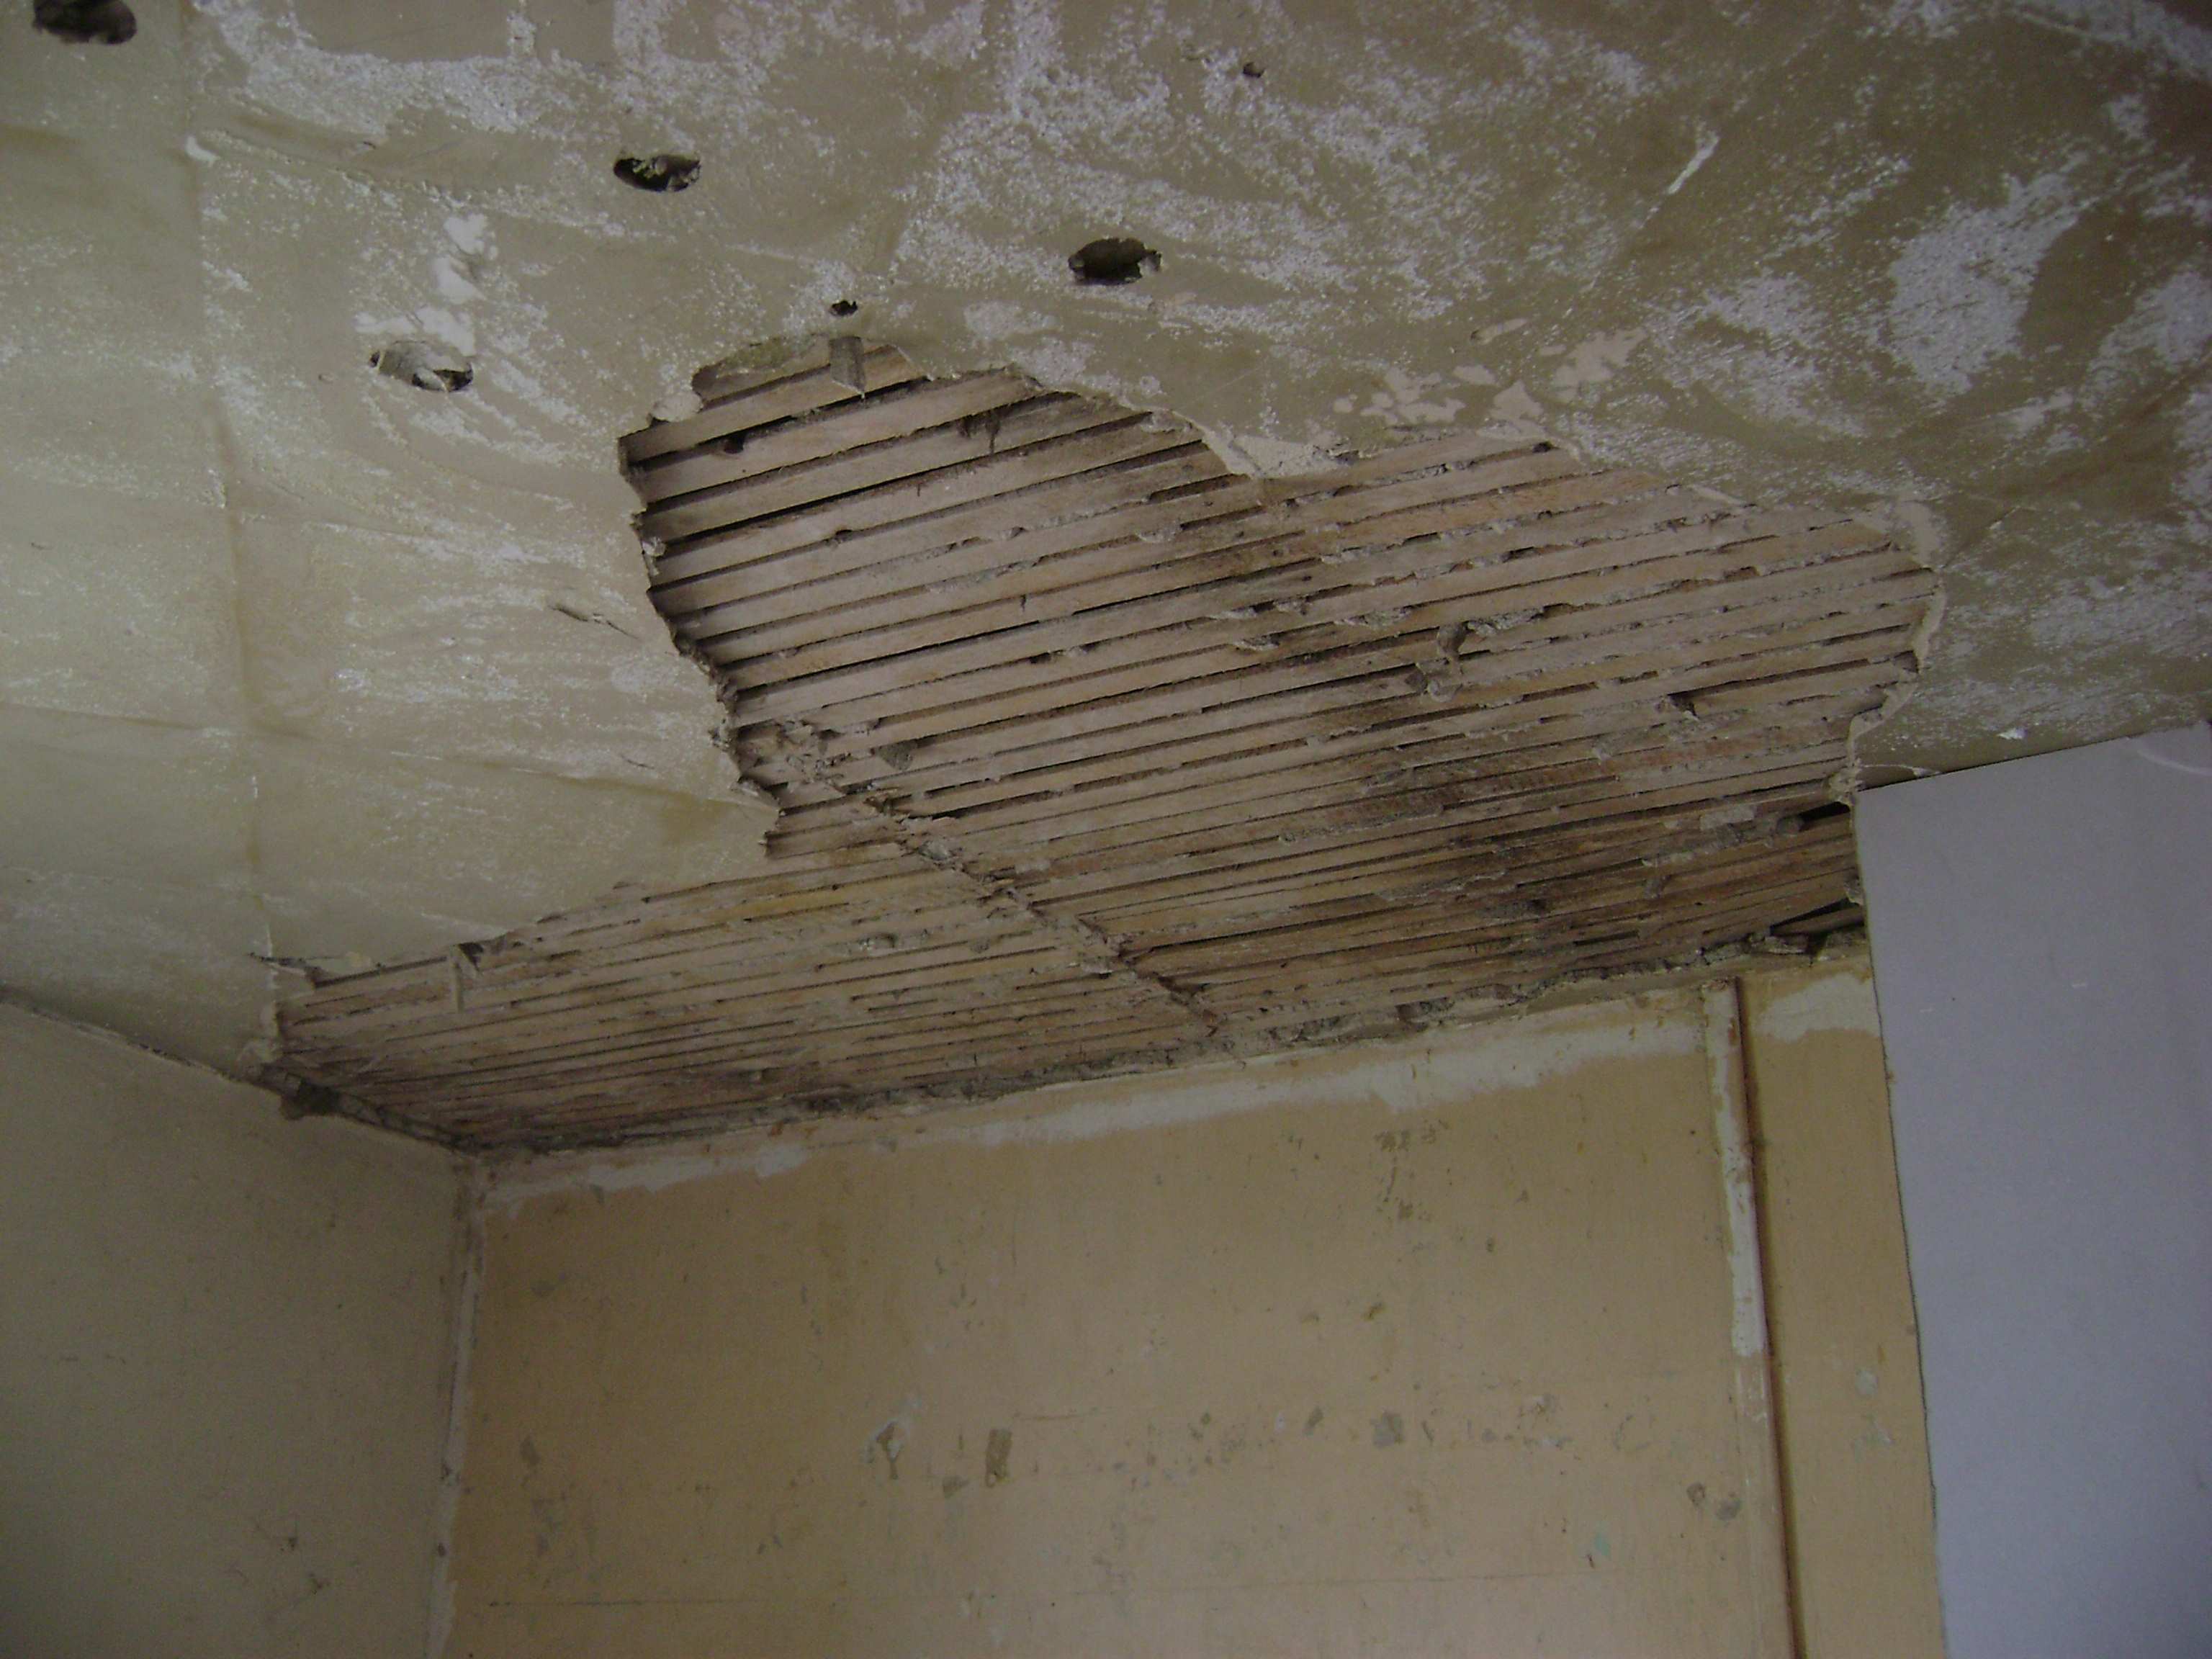 As the customer was removing old polystyrene tiles a large section of ceiling fell away